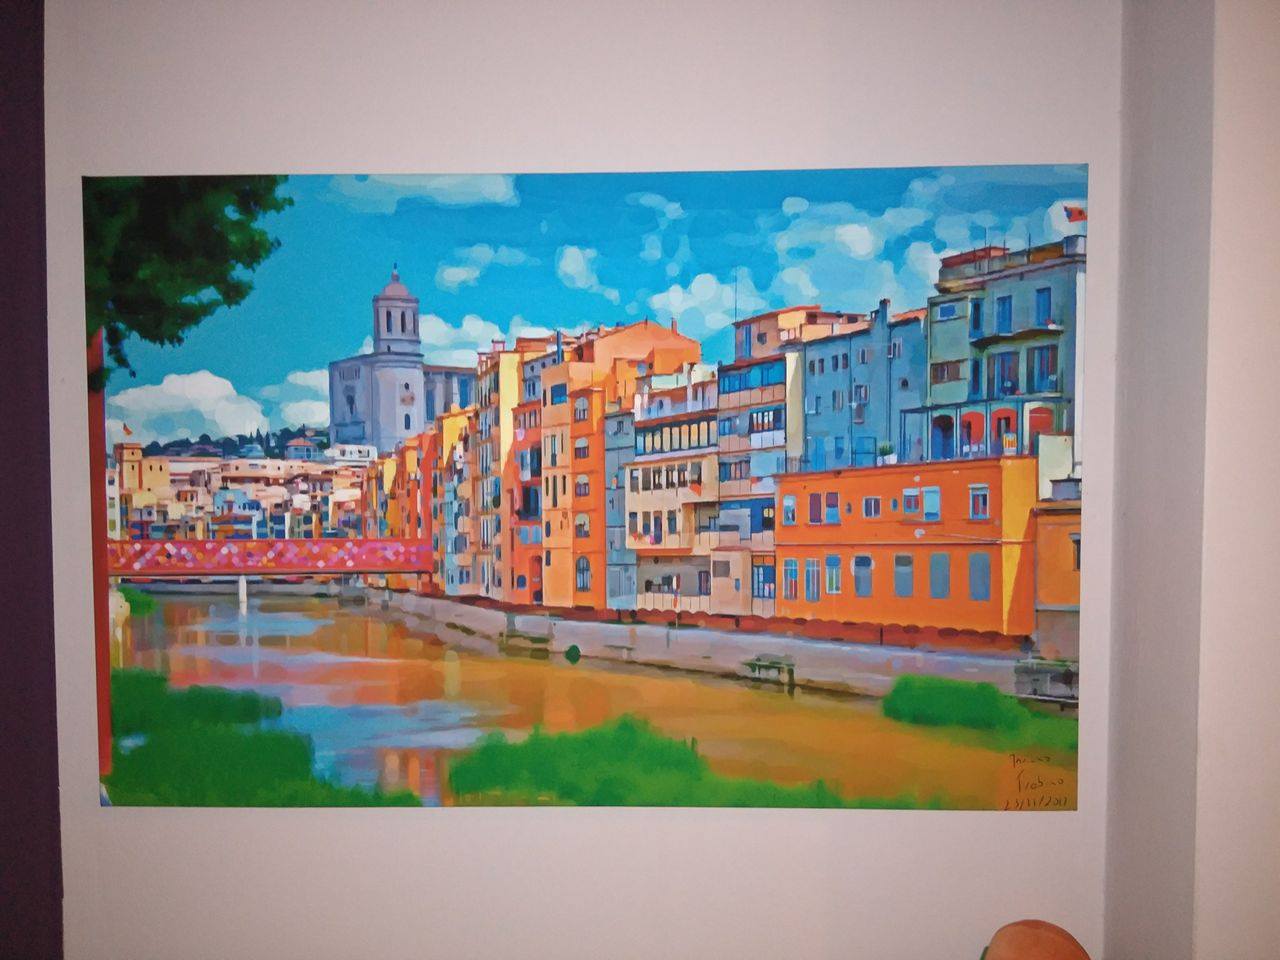 Image printed on a Canvas